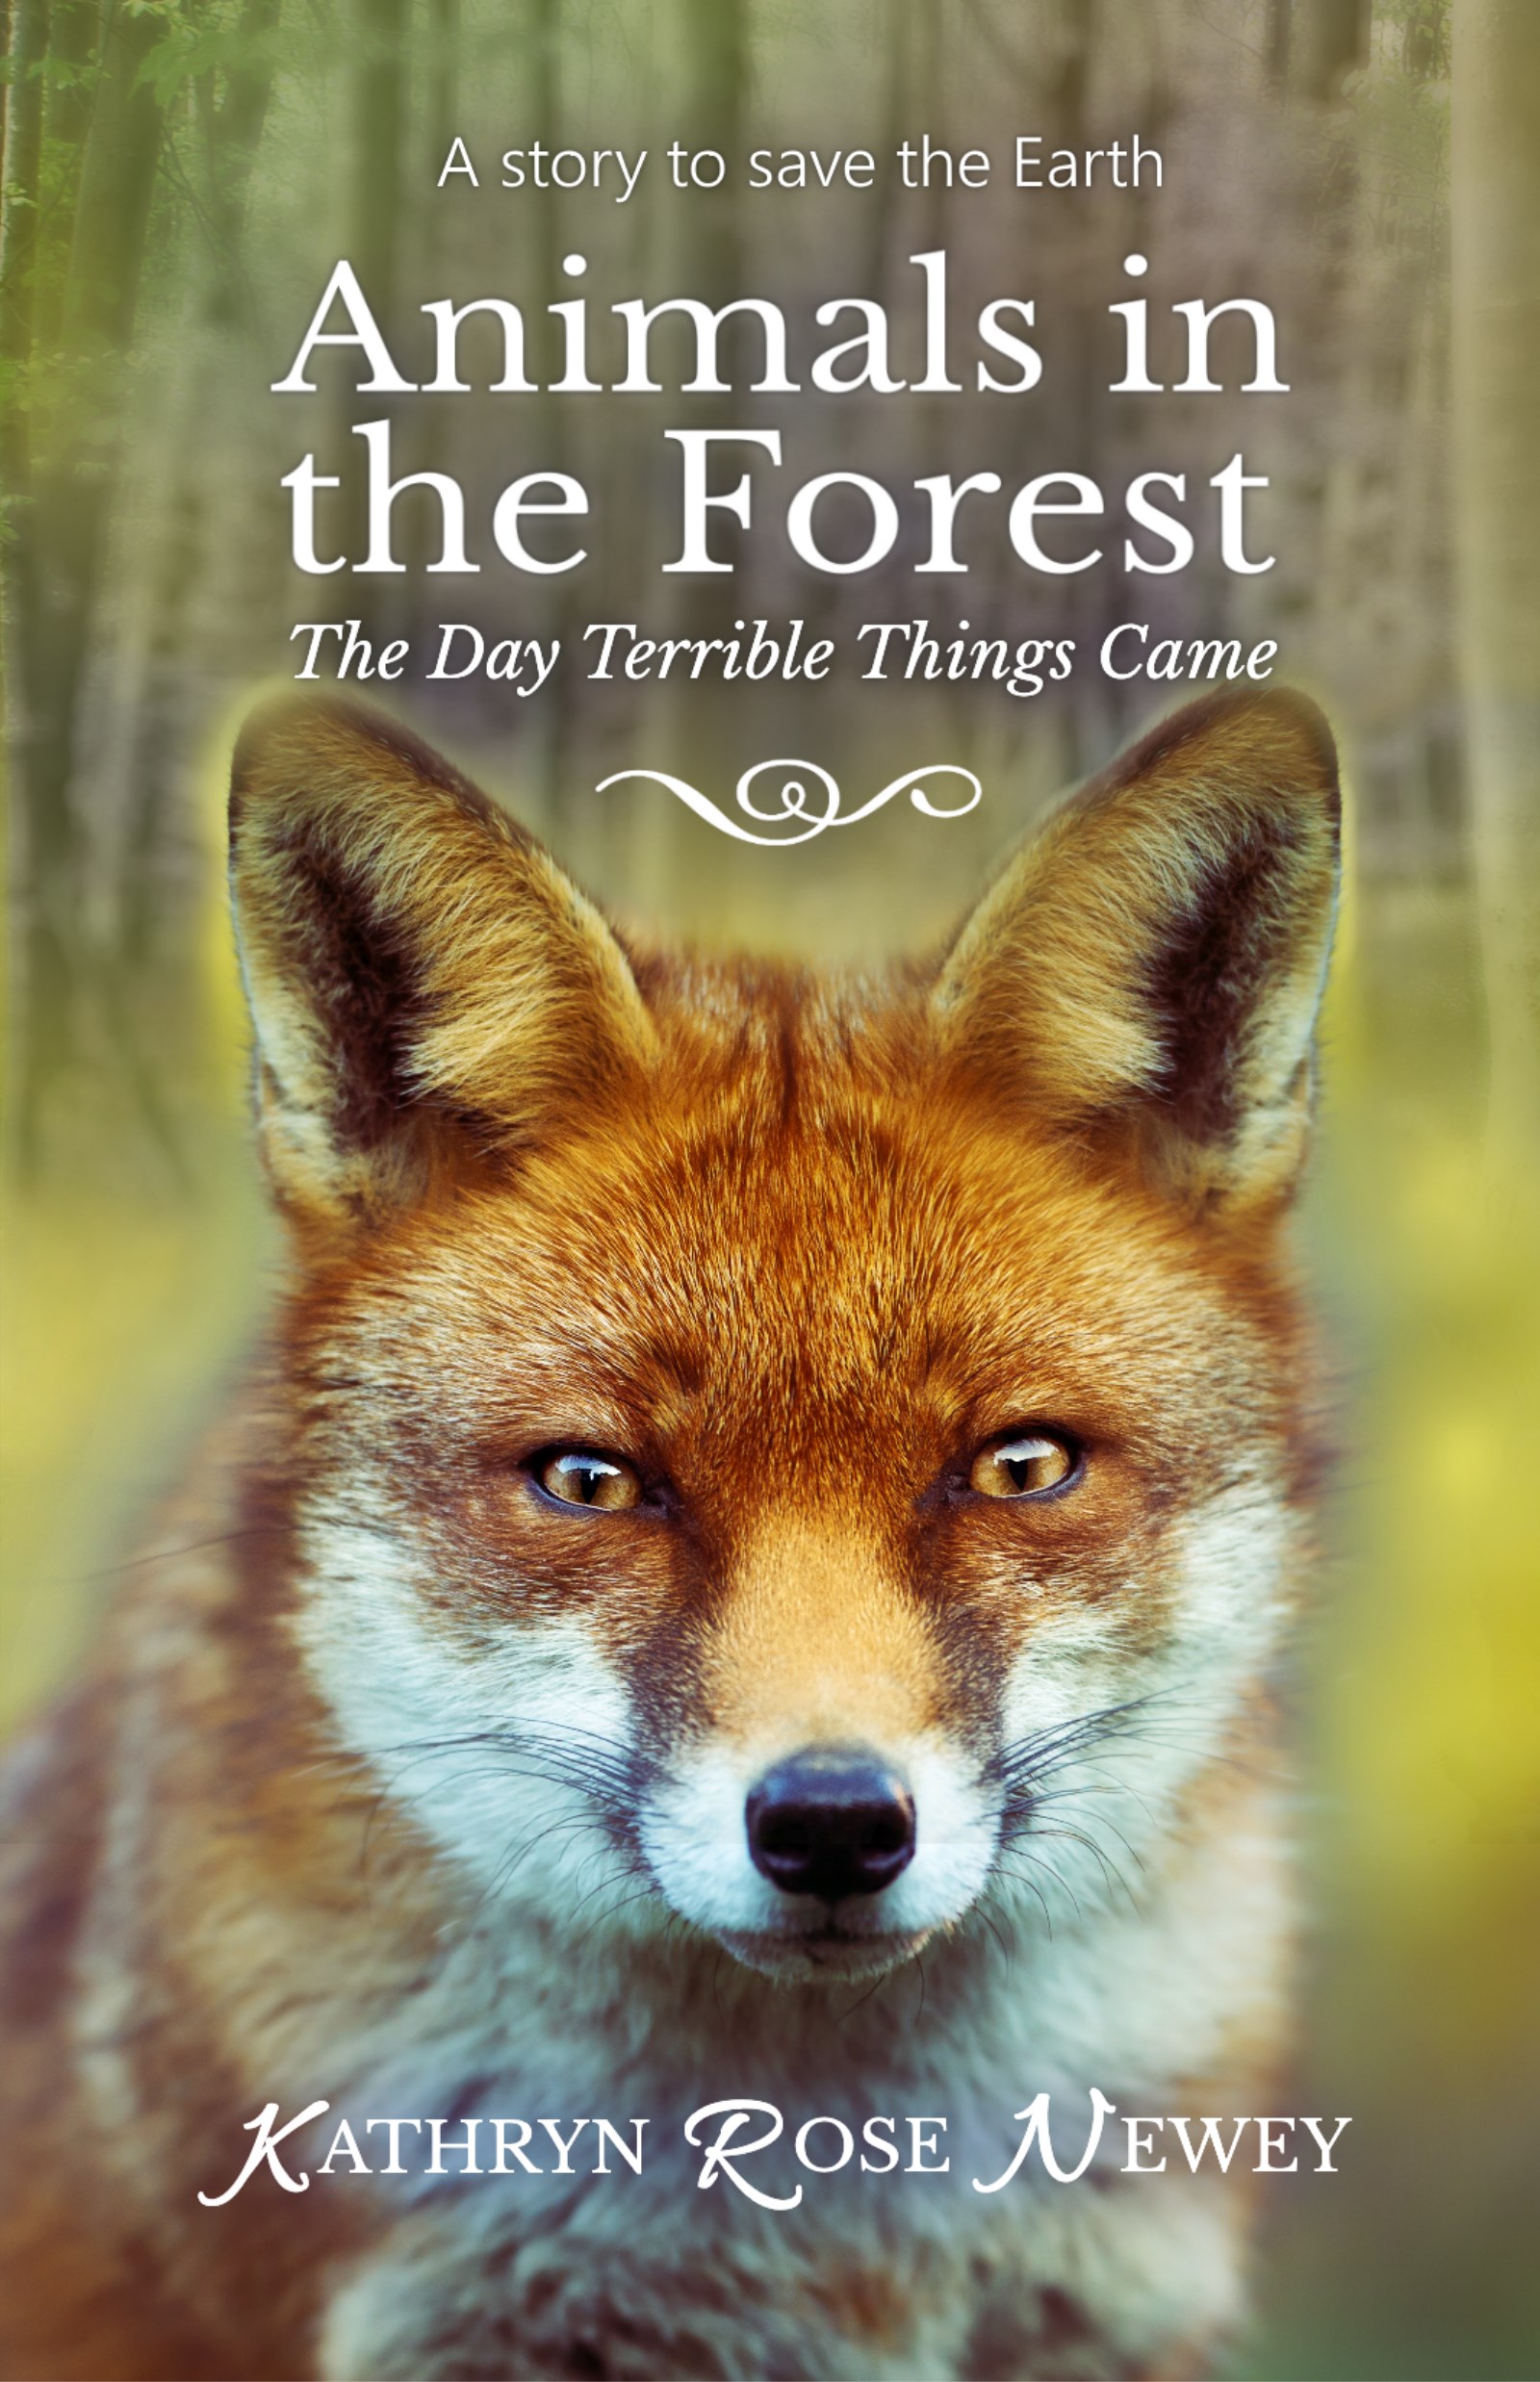 Animals in the Forest: The Day Terrible Things Came by Kathryn Rose Newey